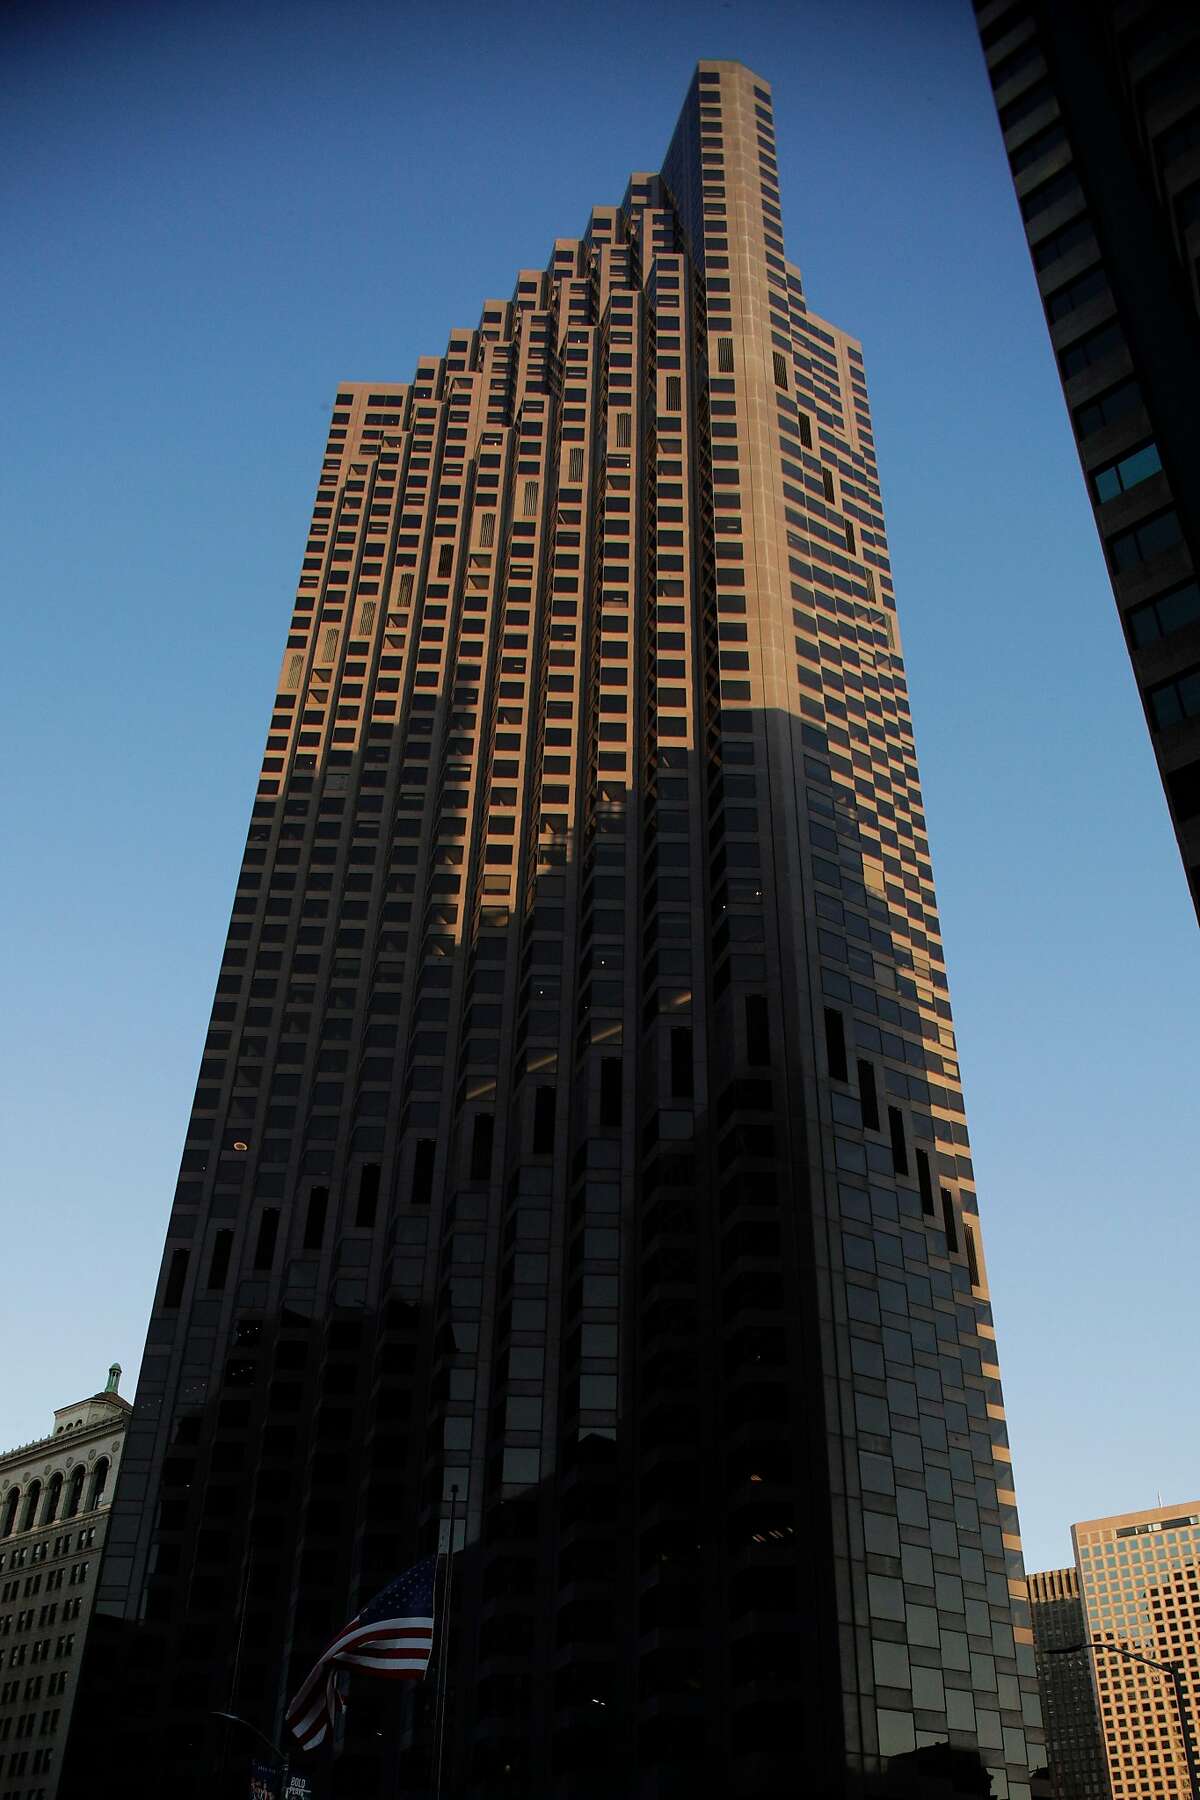 The exterior of 555 California Street in San Francisco, Calif., on Wednesday, May 6, 2020. Co-working giant Regus has walked away from a 15-year lease worth $90 million at 345 Montgomery St., the former bank of America banking hall co-owned by Vornado and the Trump Organization which also owns 555 California Street.